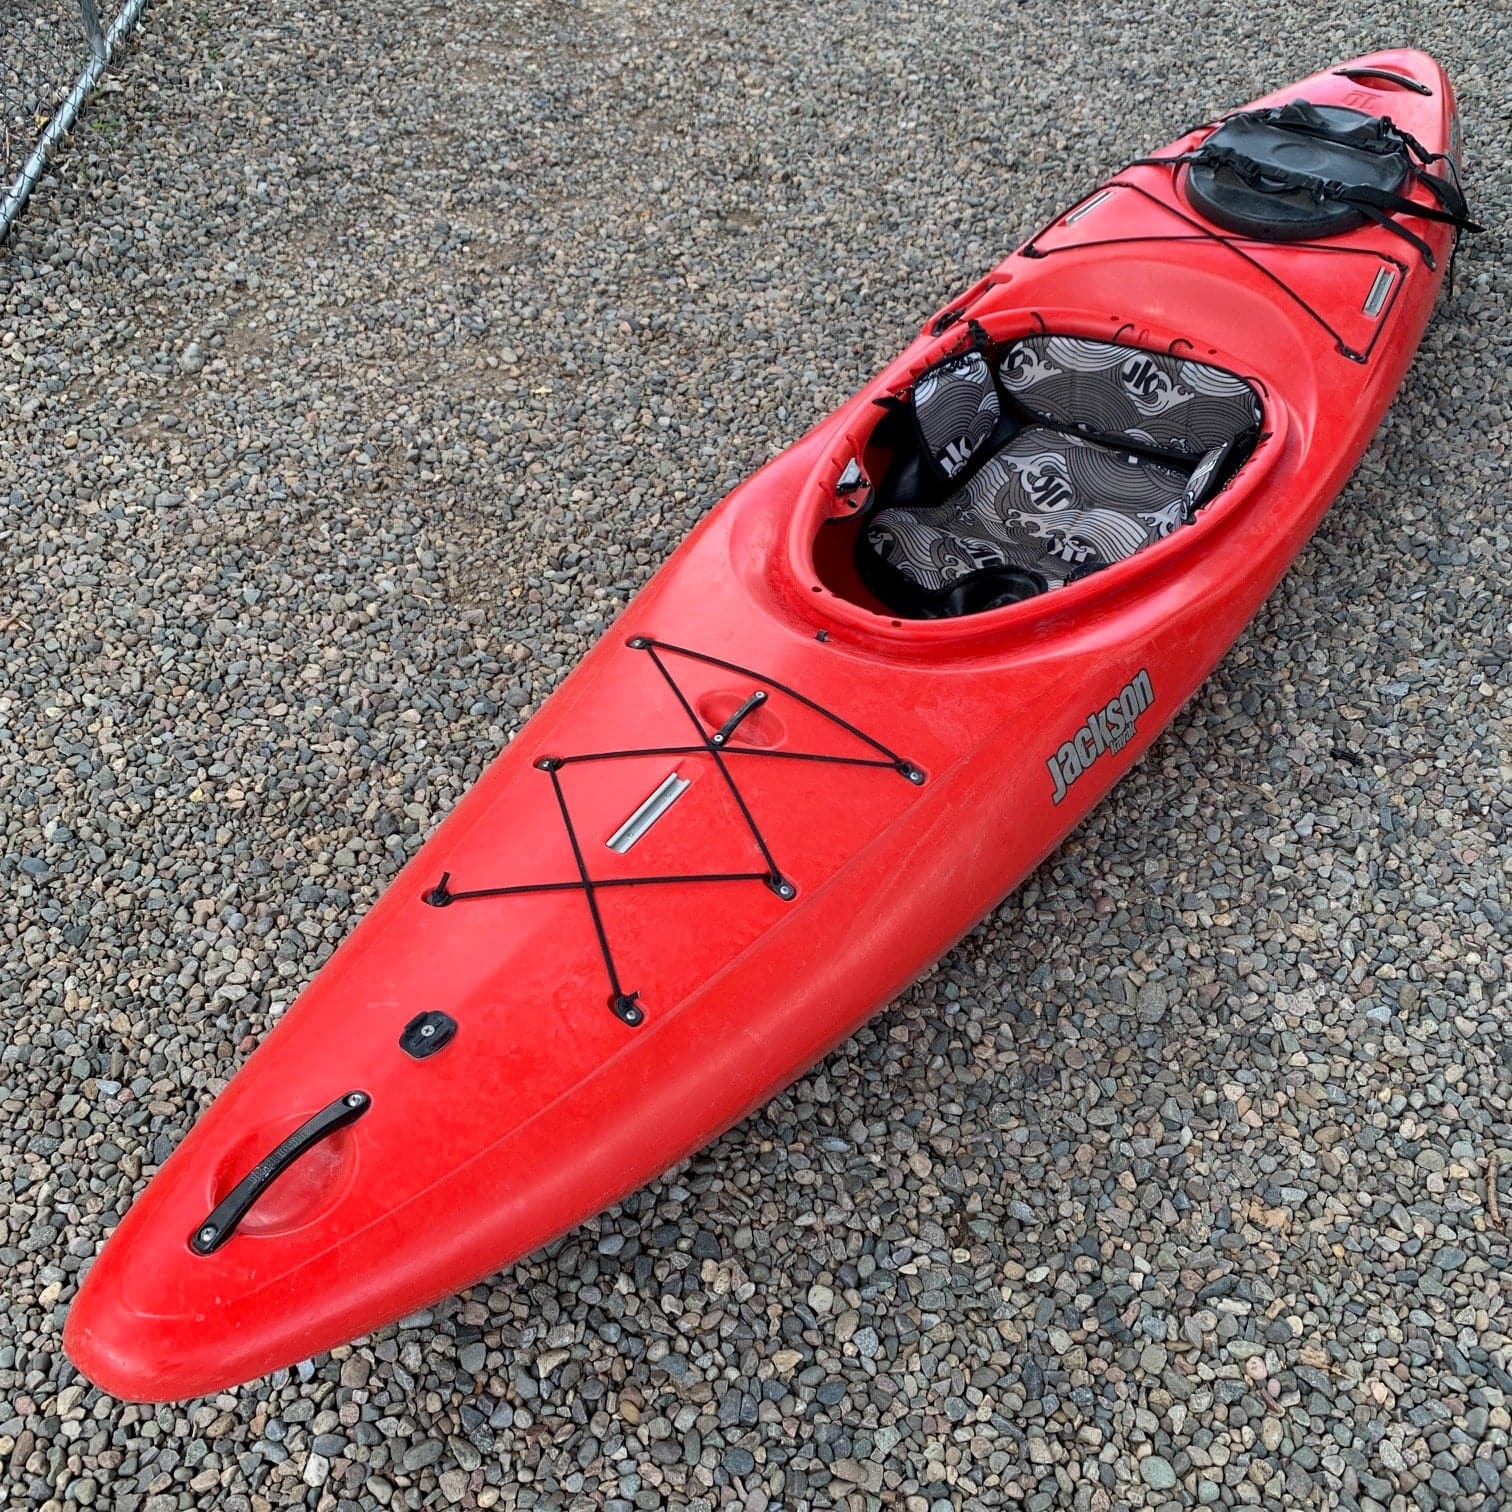 Featuring the Used Karma Traverse 10 used whitewater kayak manufactured by Jackson Kayak shown here from a third angle.